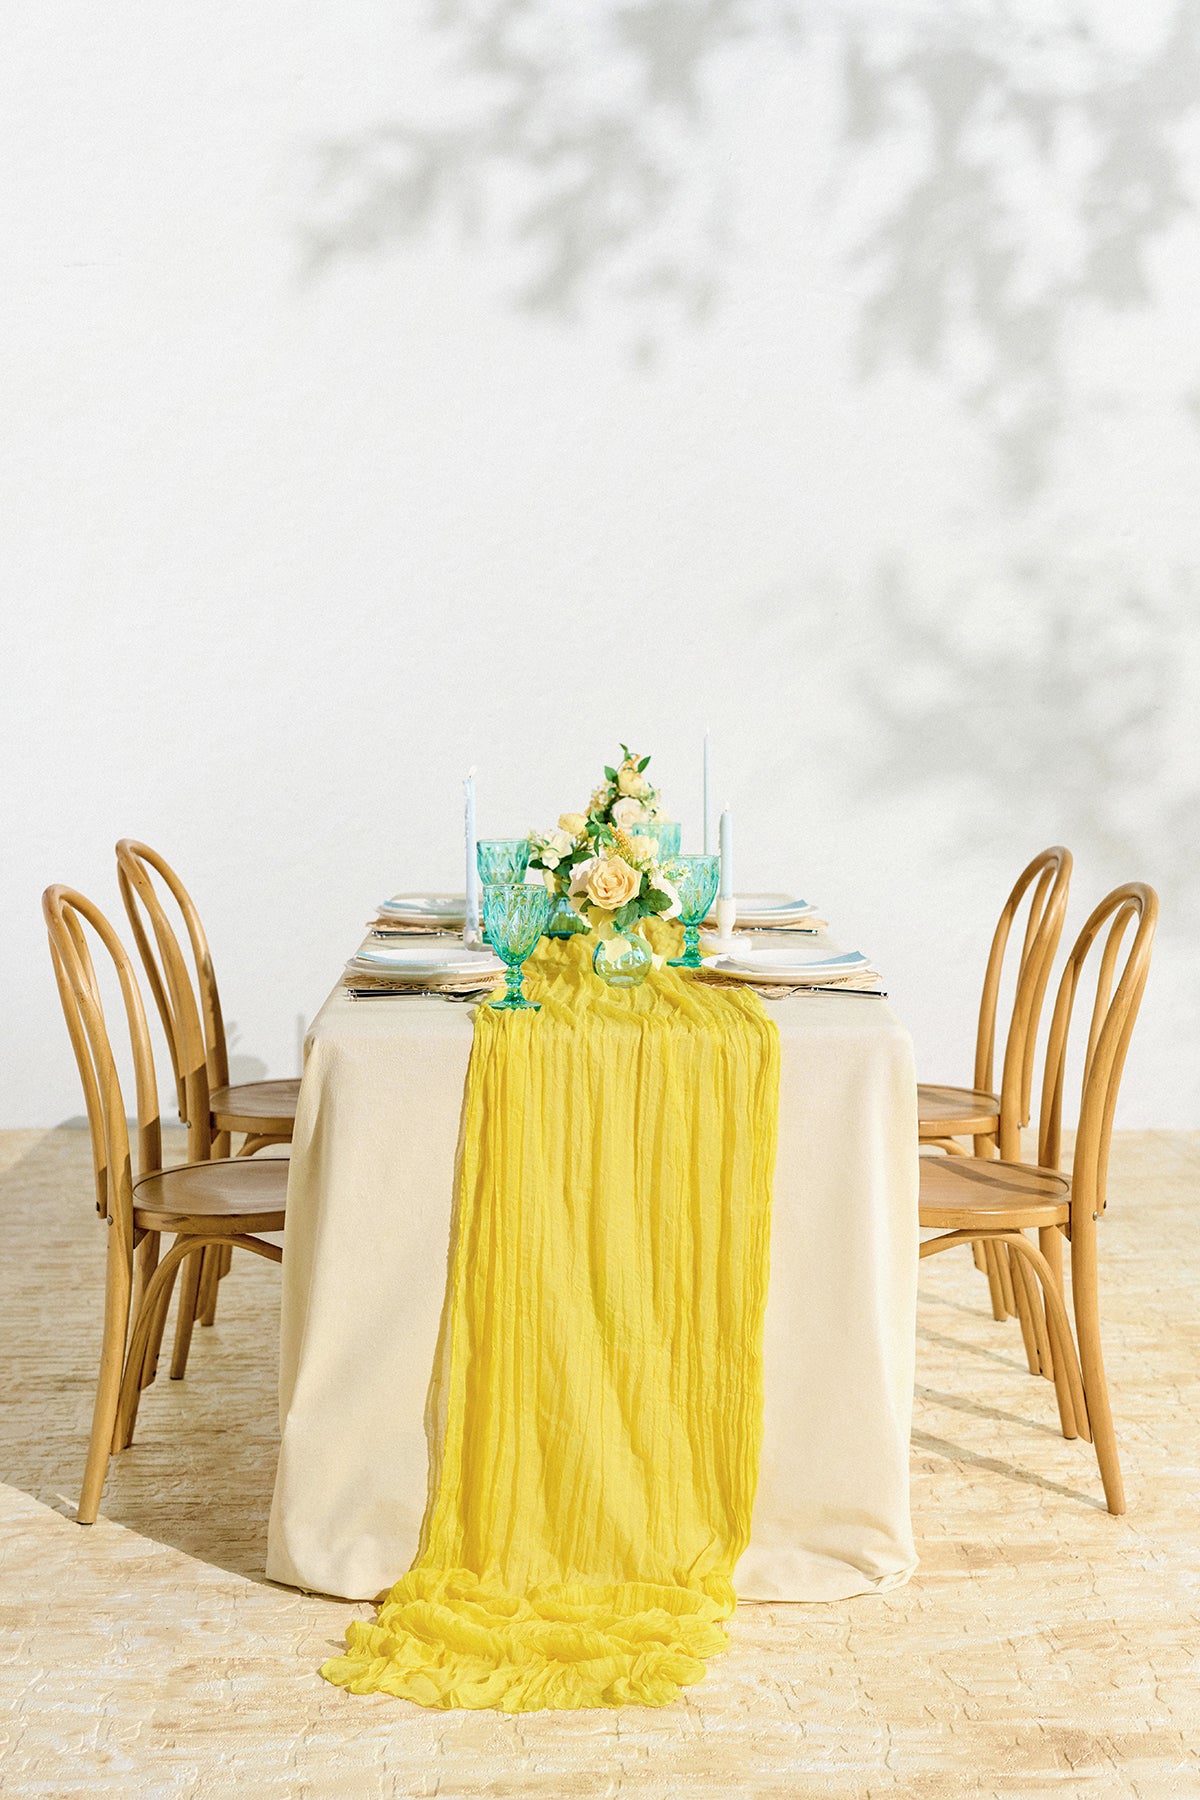 Cheesecloth Table Runner in Lemonade Yellow